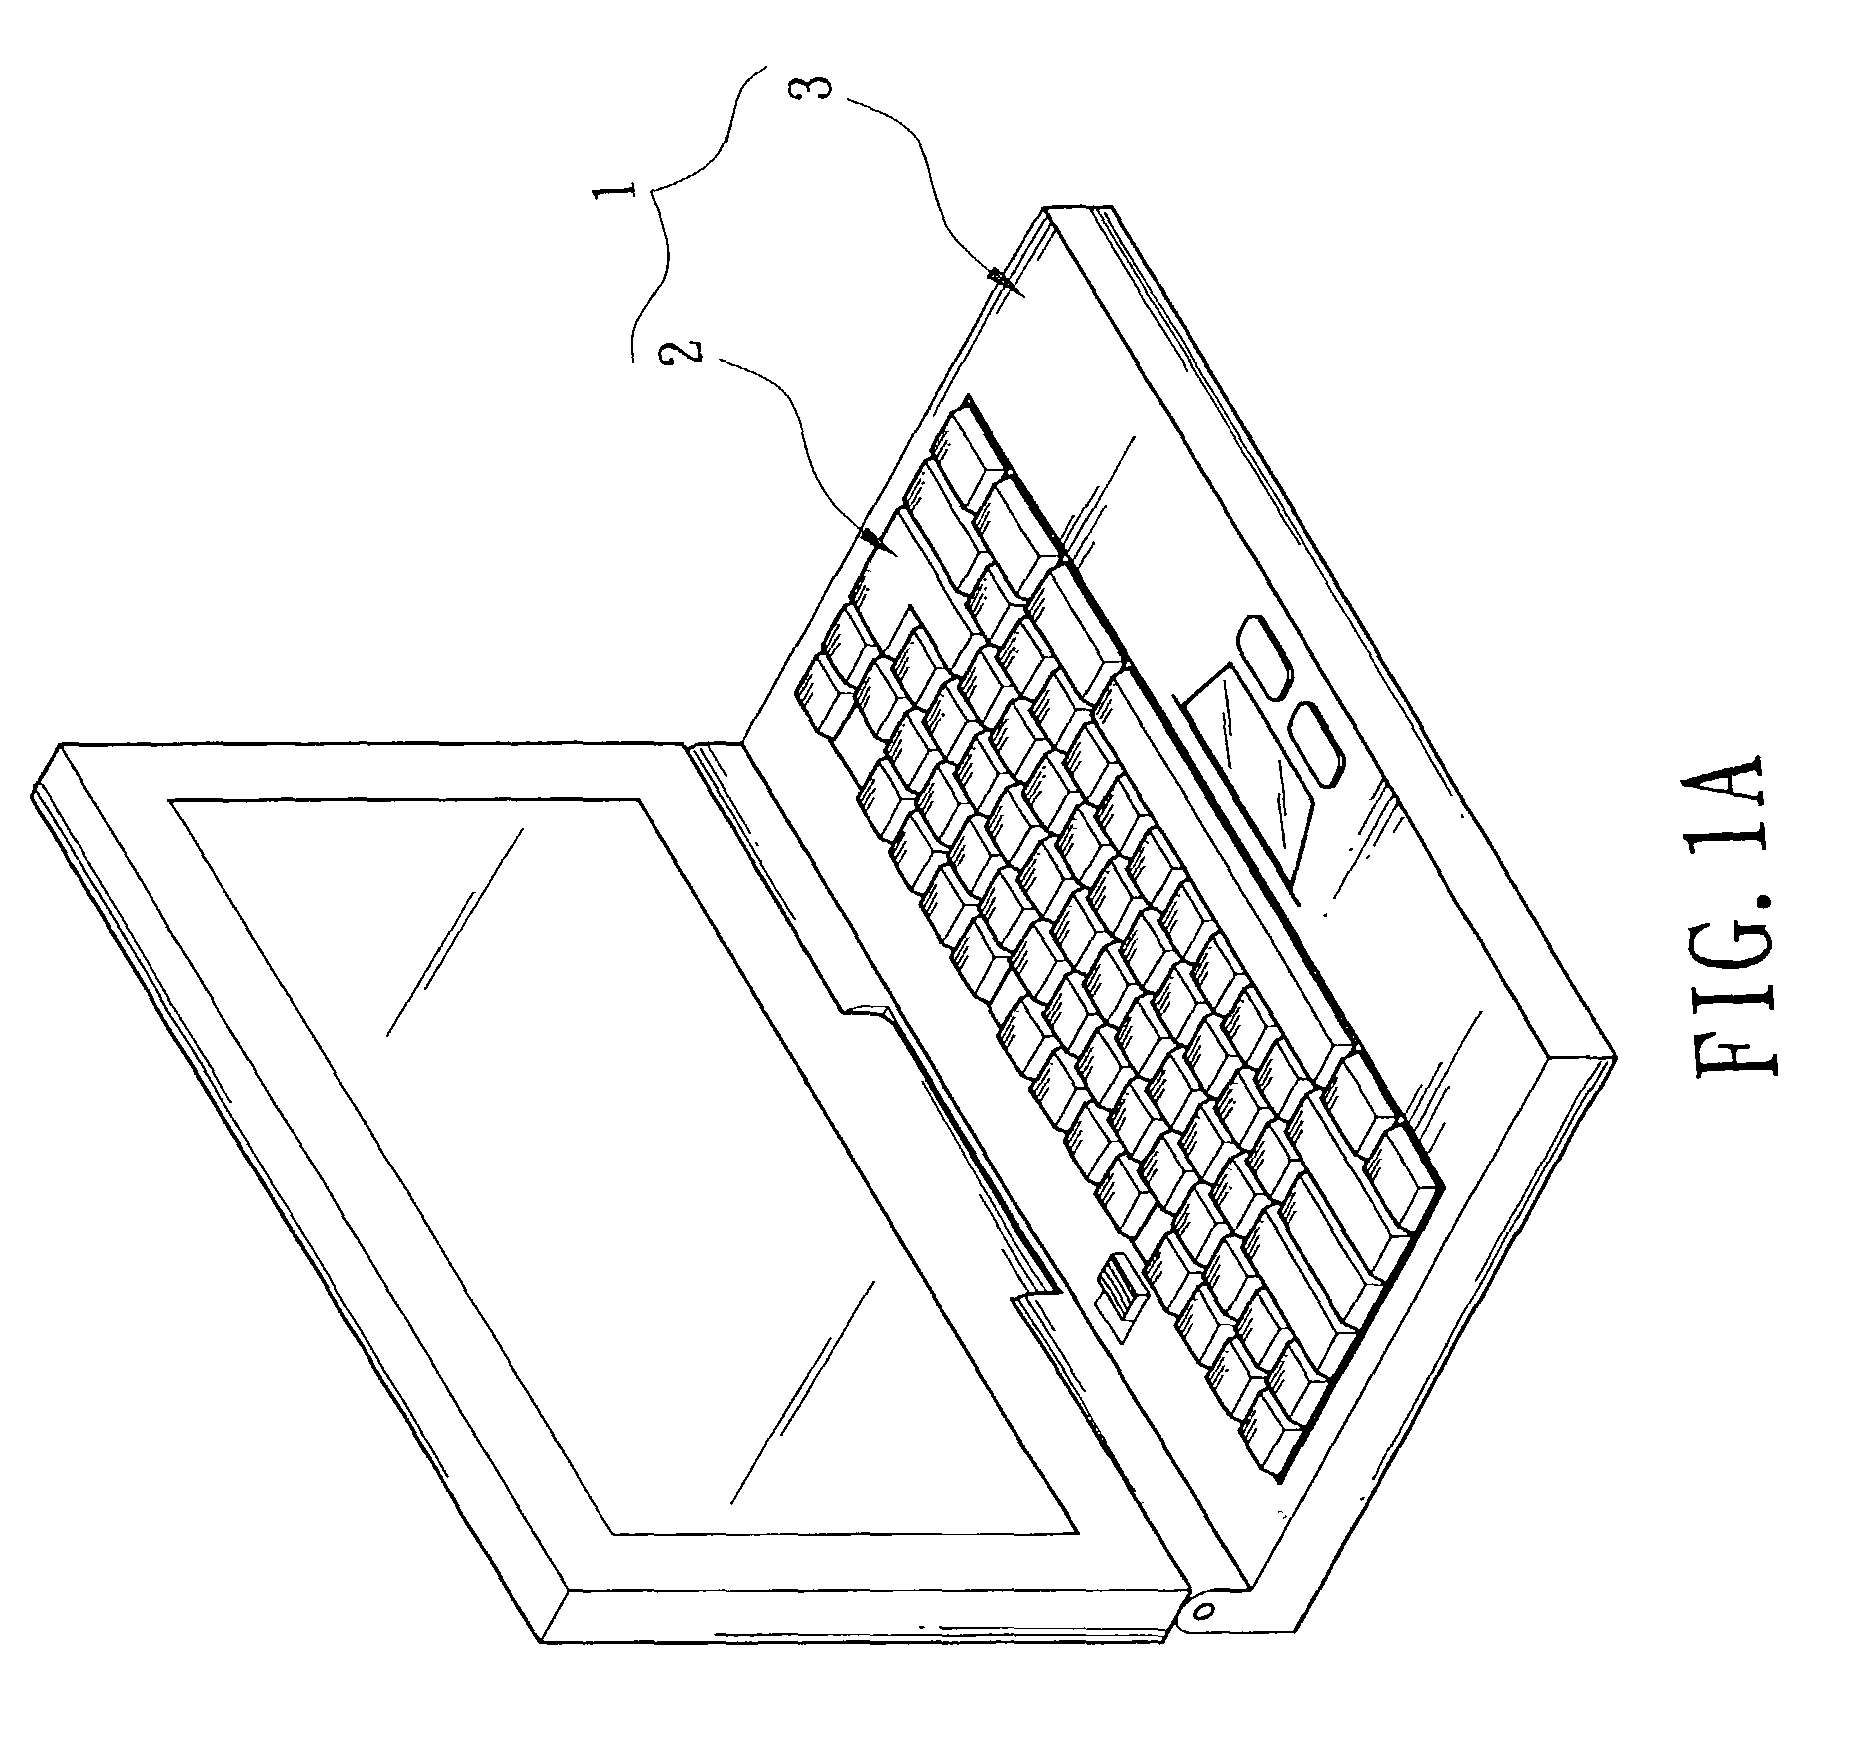 Notebook computer with a detachable keyboard